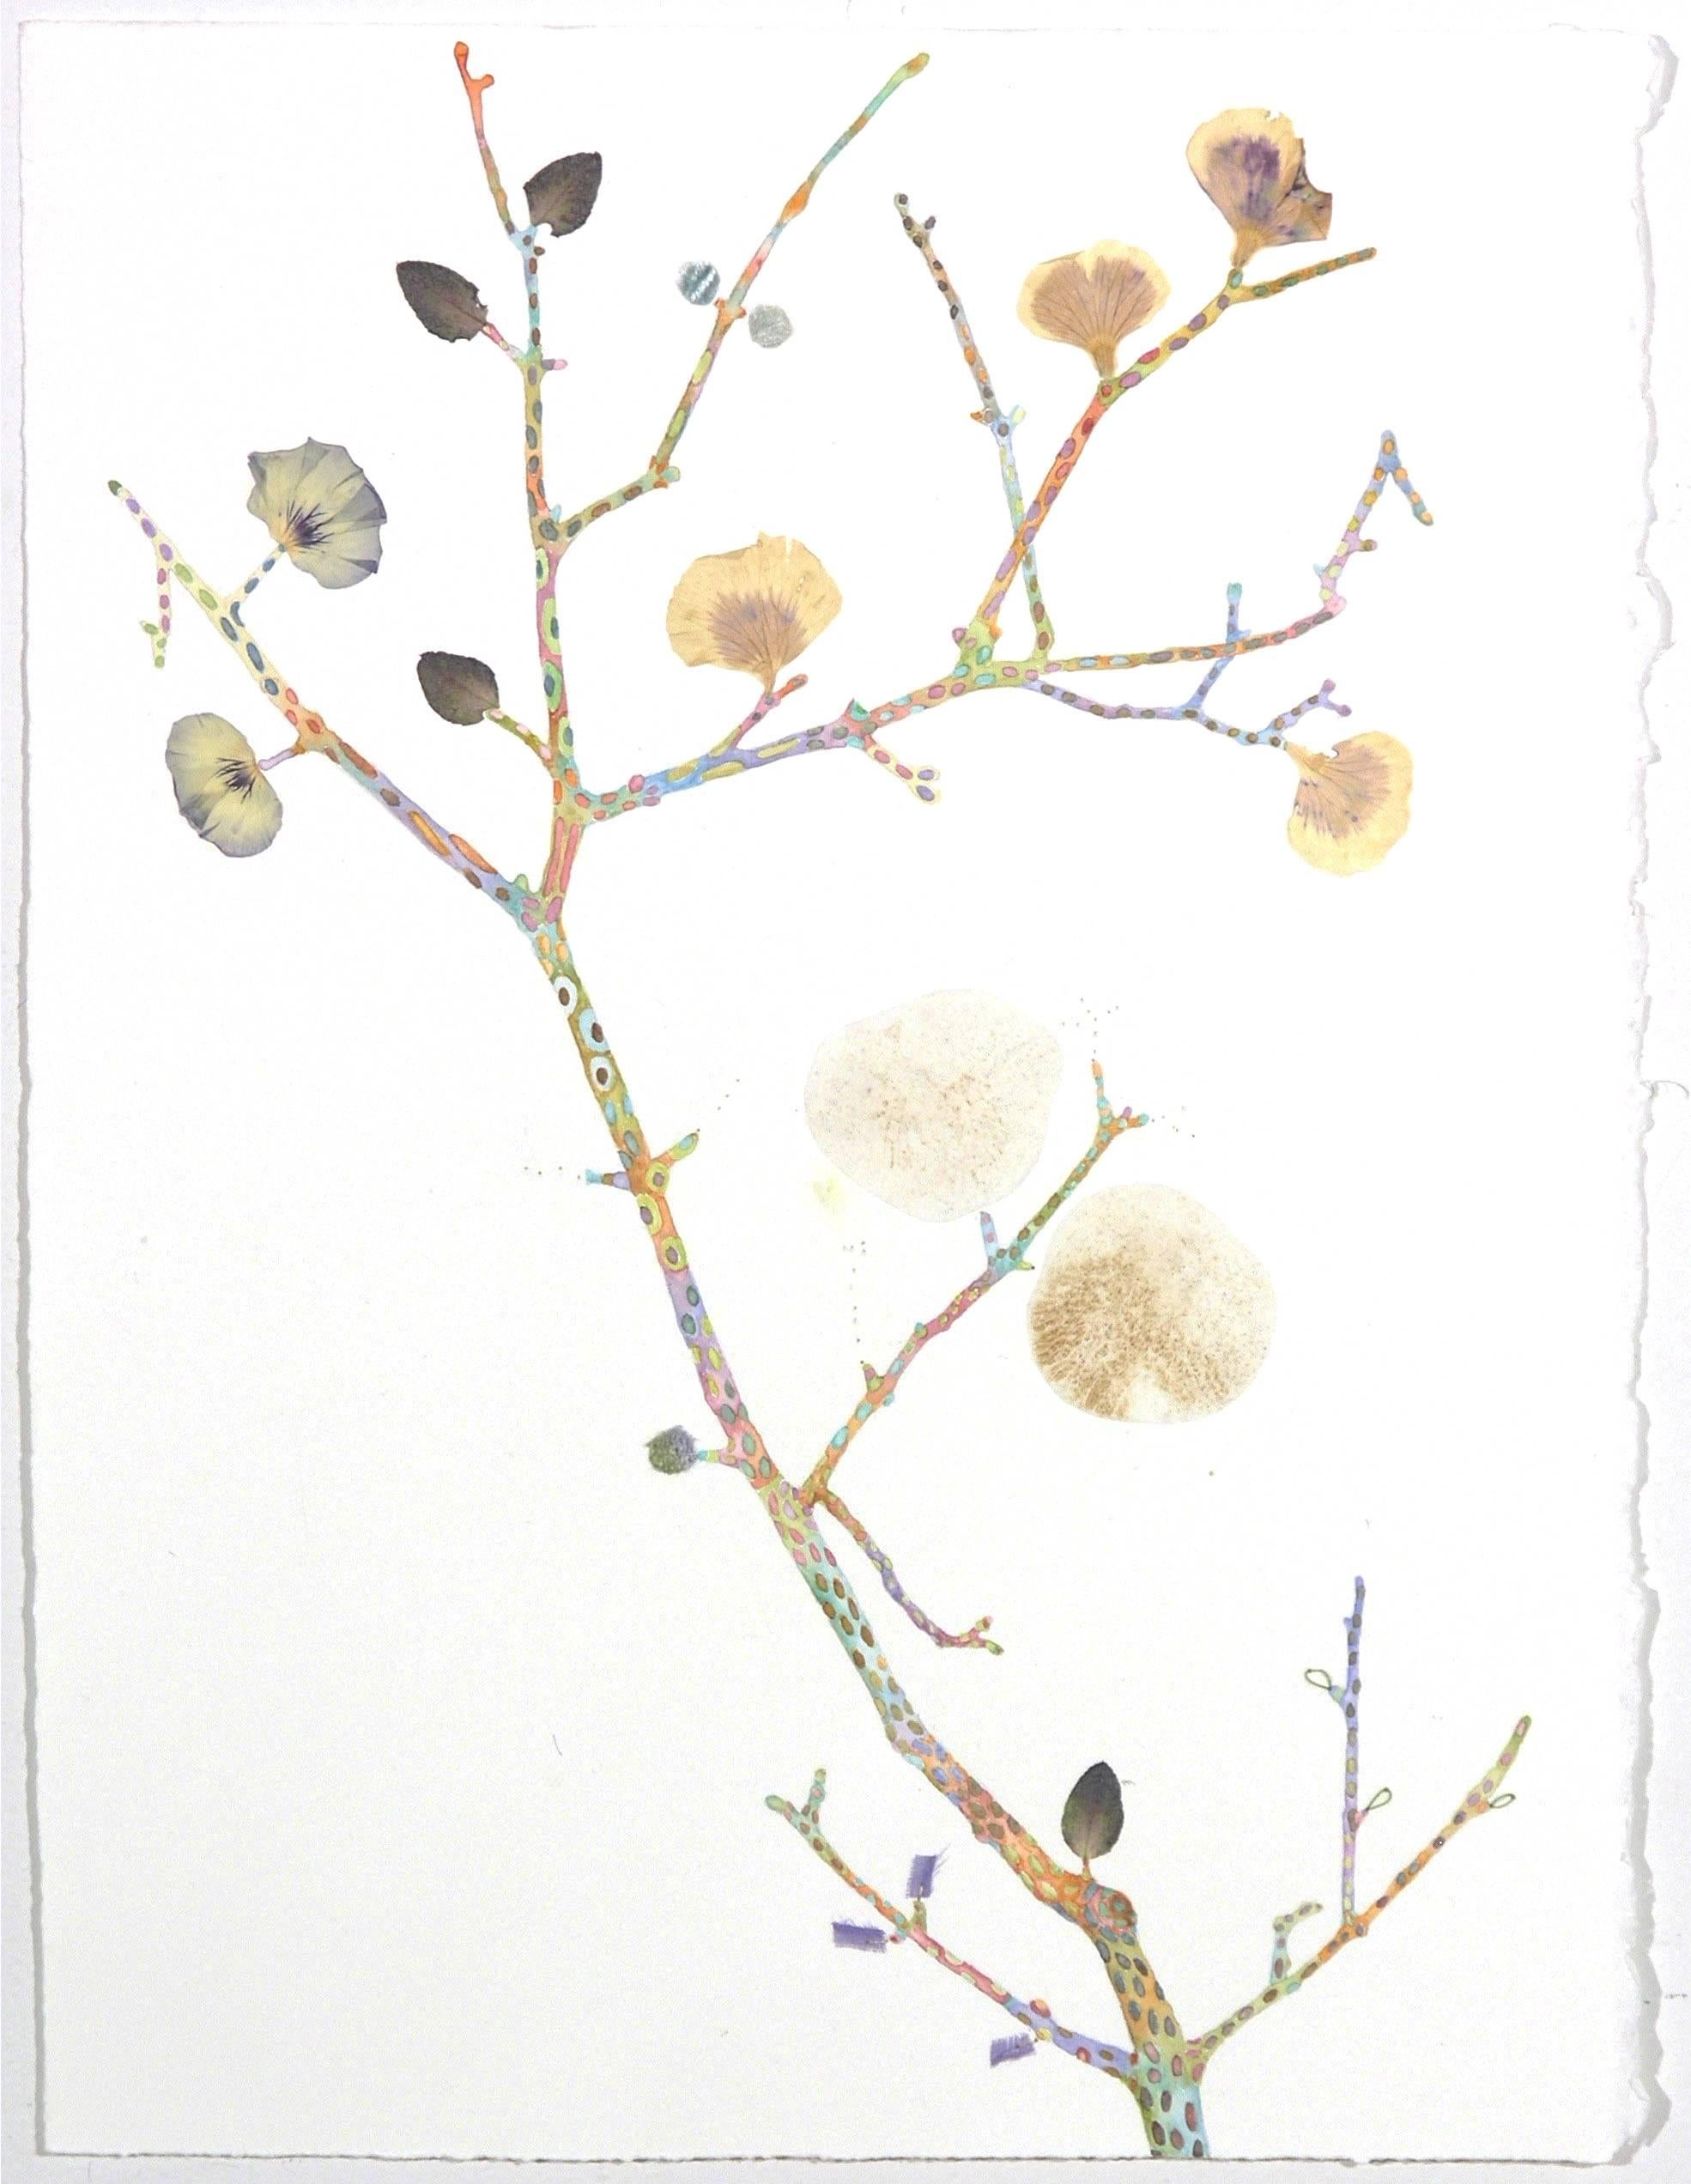 Marilla Palmer
Pattern and Petal, 2016
watercolor, pressed foliage, spores and velvet on Arches paper
15 x 11 in.

This original artwork by Marilla Palmer is a twist on the traditional Victoria botanical drawing, delicately painted with watercolor